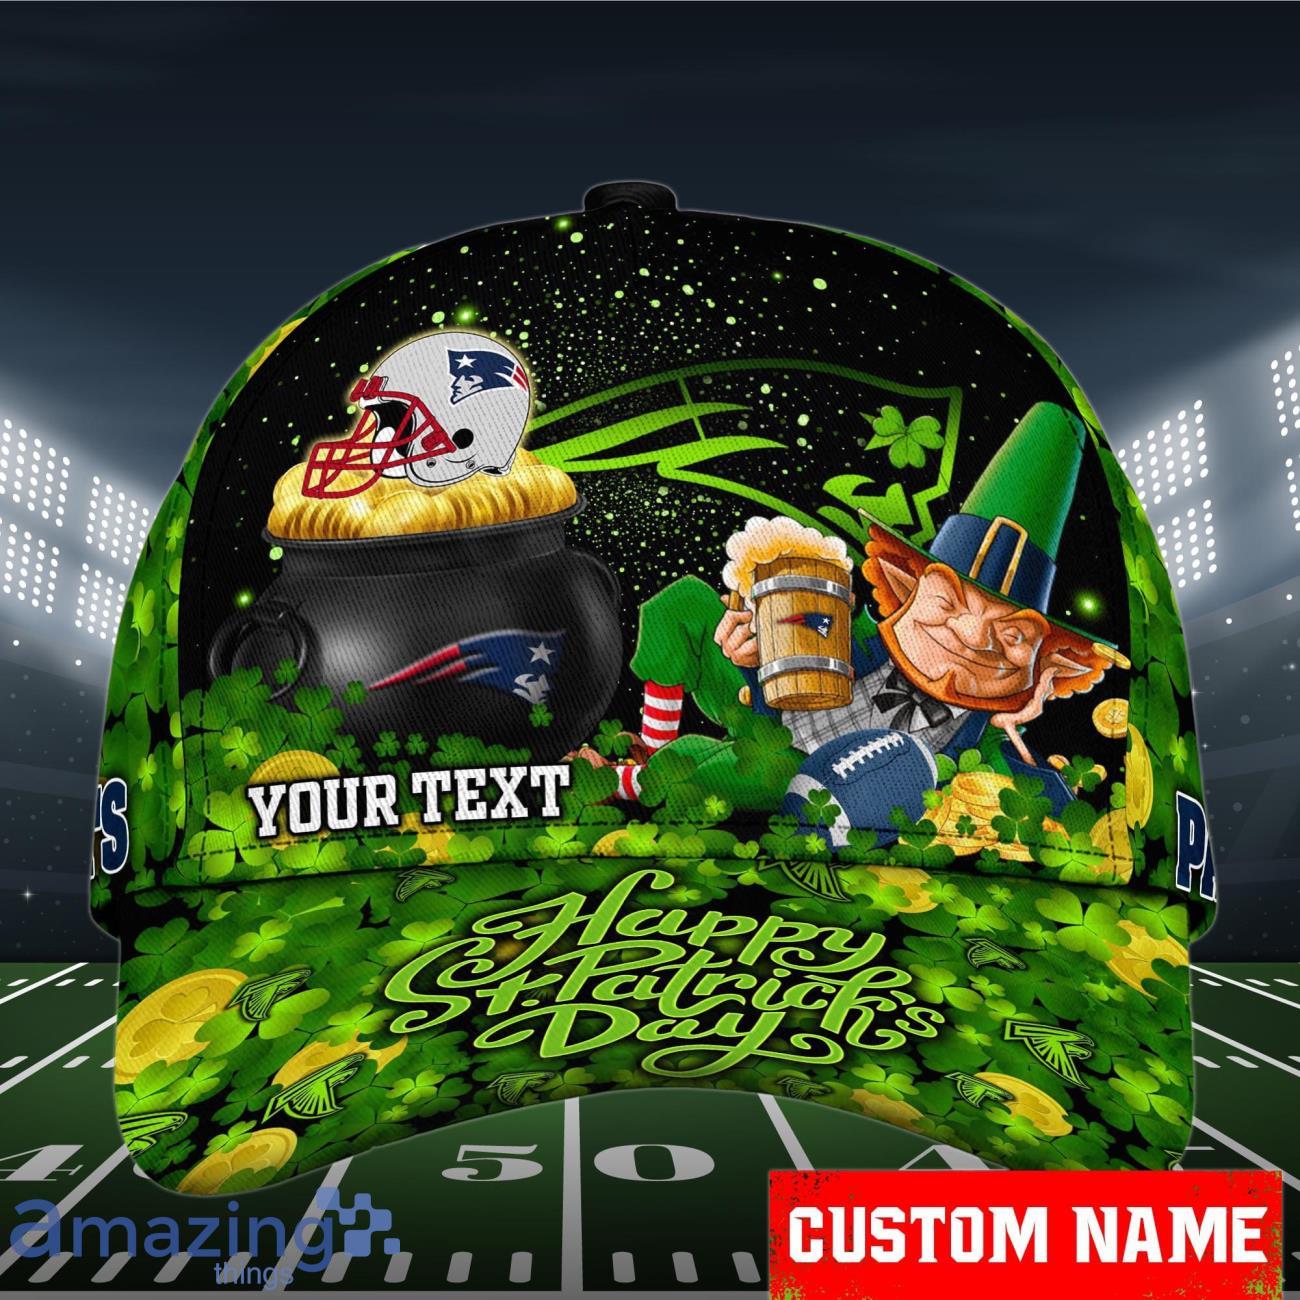 New England Patriots NFL Cap 3D Patrick's Day Custom Name For Fans Product Photo 1